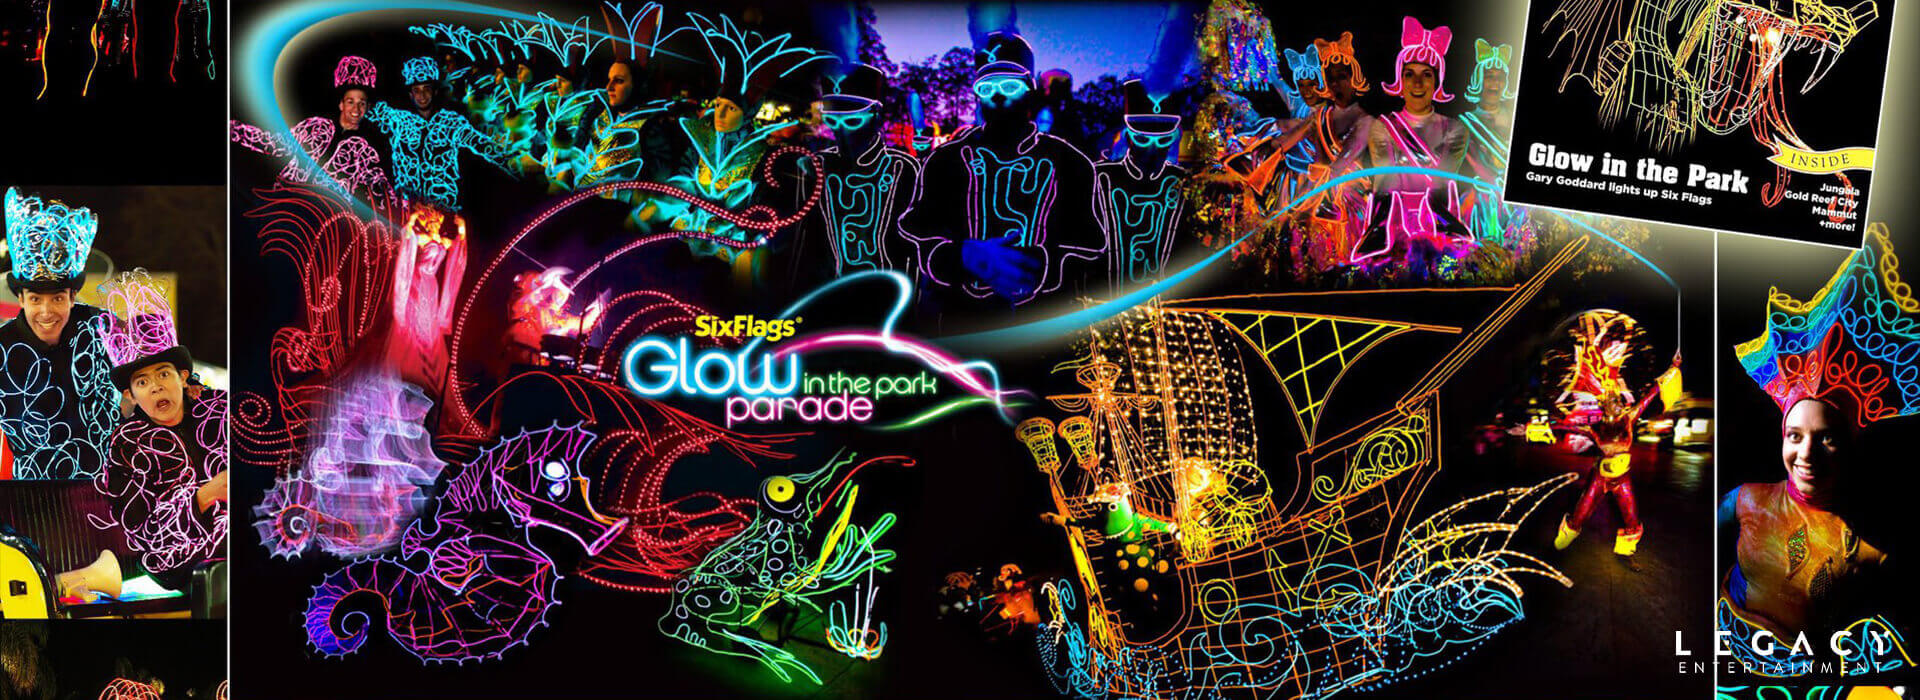 Six_Flags_Parade_Glow_in_the_Park__Parade_Design_Legacy_Entertainment_2